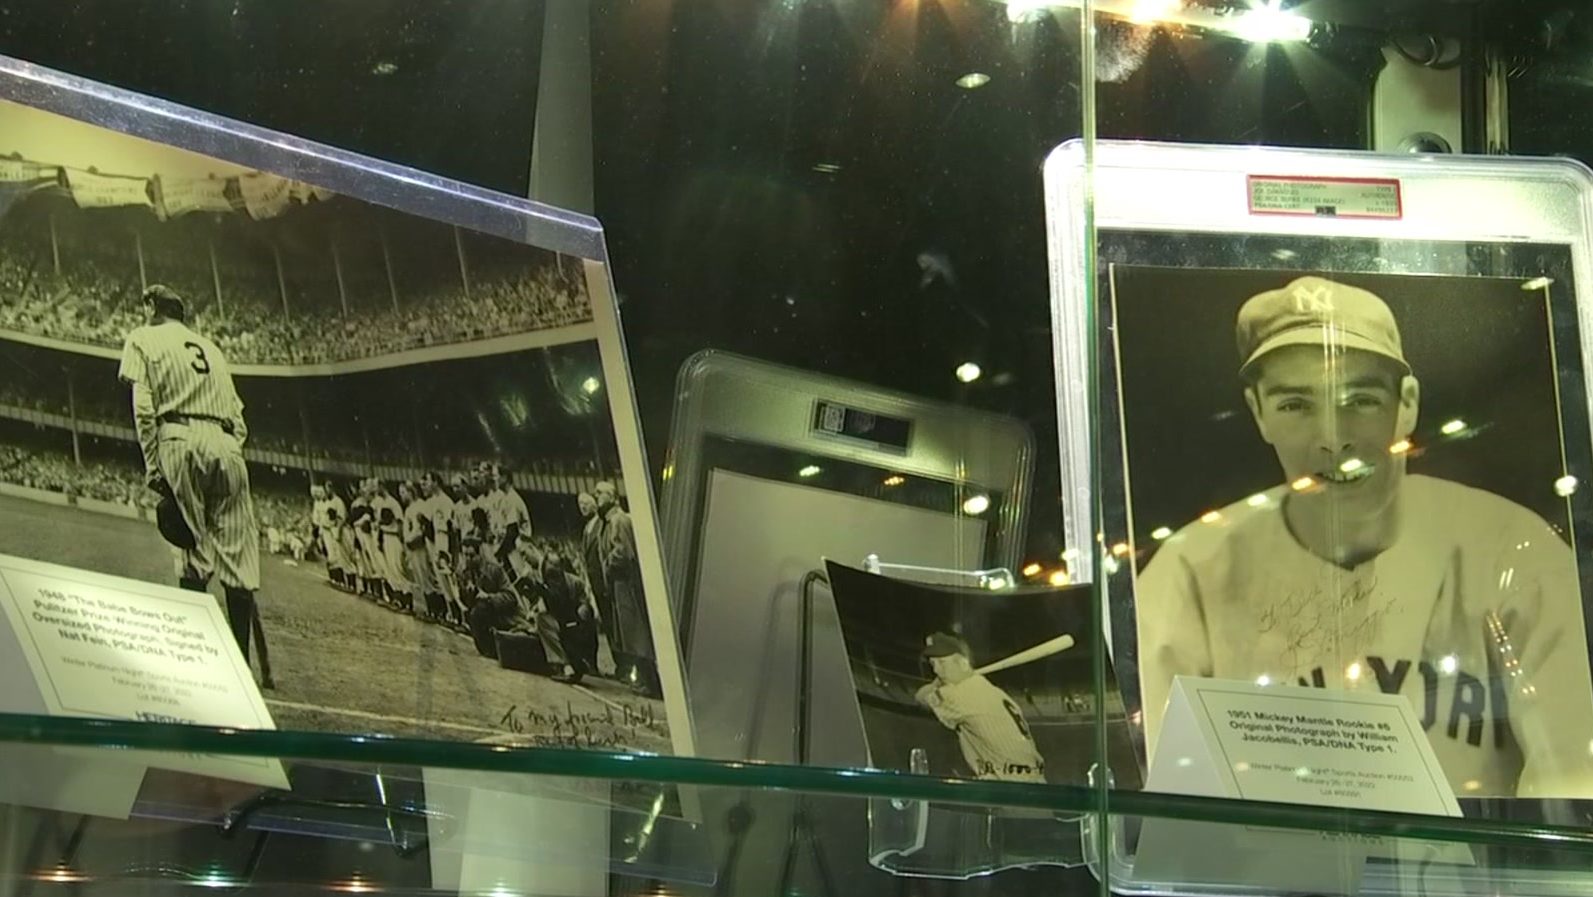 Sports memorabilia up for auction in Irving